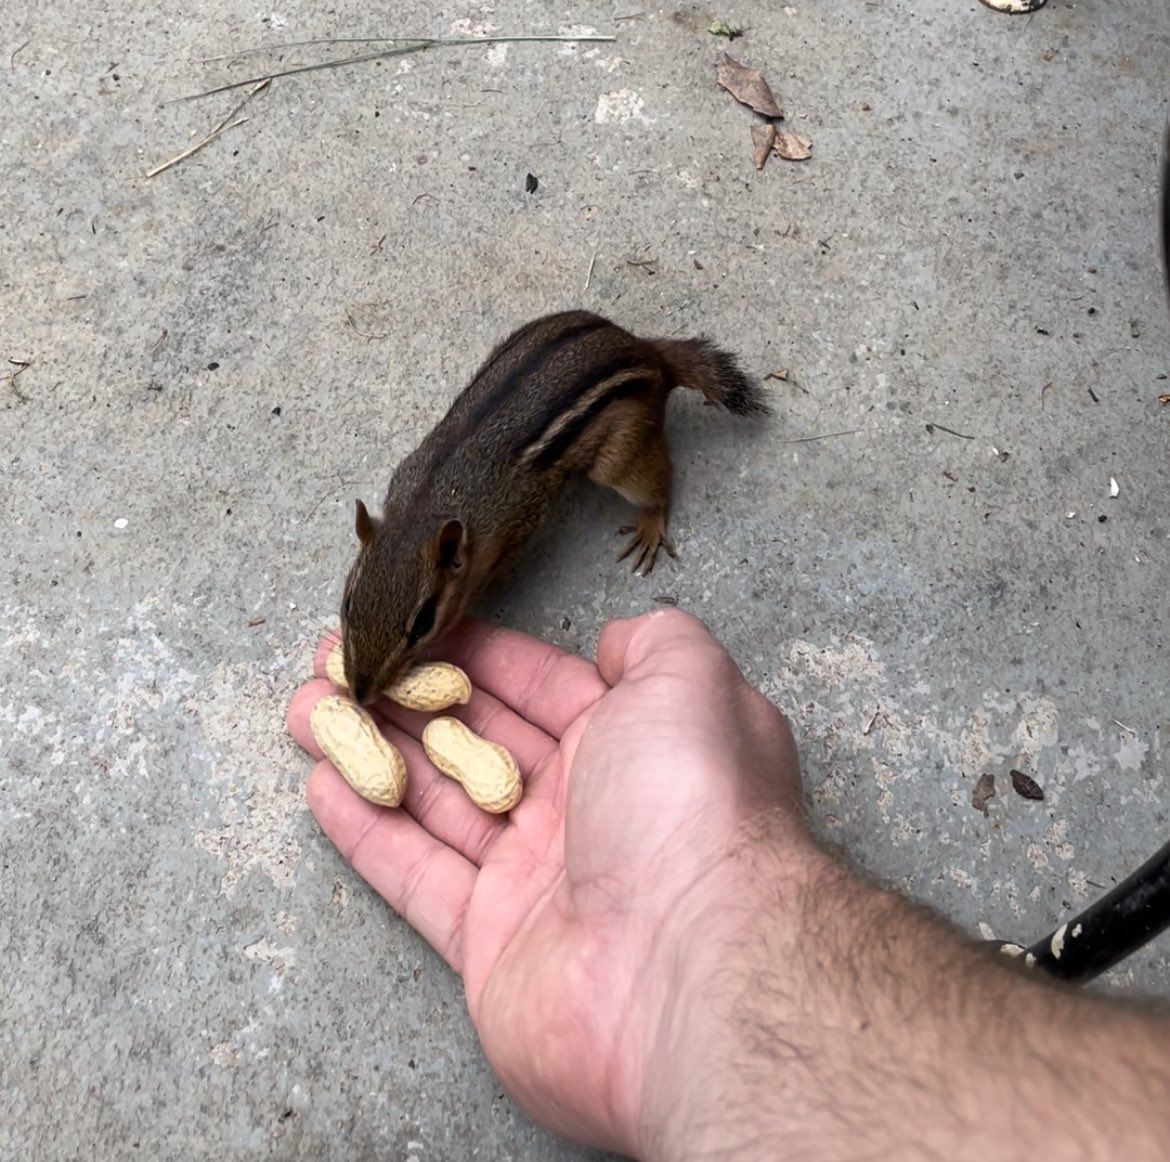 Last summer I earned the trust of a little chipmunk, where he would eat from my hand. I often wonder if animals we befriend sense the divine nature of such moments - a tenuous bridge between two orders of Creation. Perhaps not for fren to comprehend; such is burden of Man alone…